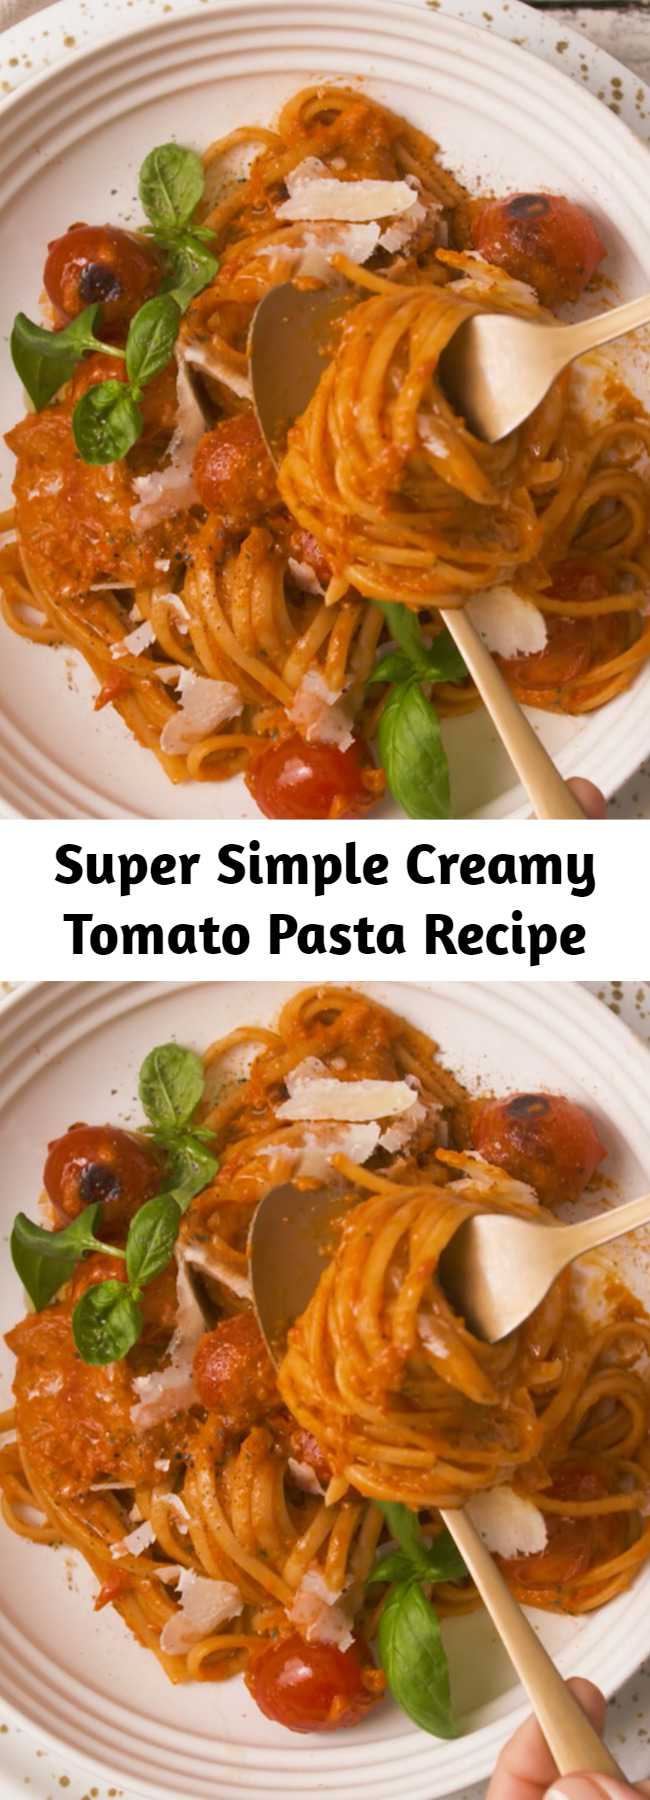 Super Simple Creamy Tomato Pasta Recipe - Roasted tomatoes, red peppers + onions and garlic blended together with some fresh basil leaves and creamy = the most simple yet delicious pasta sauce!